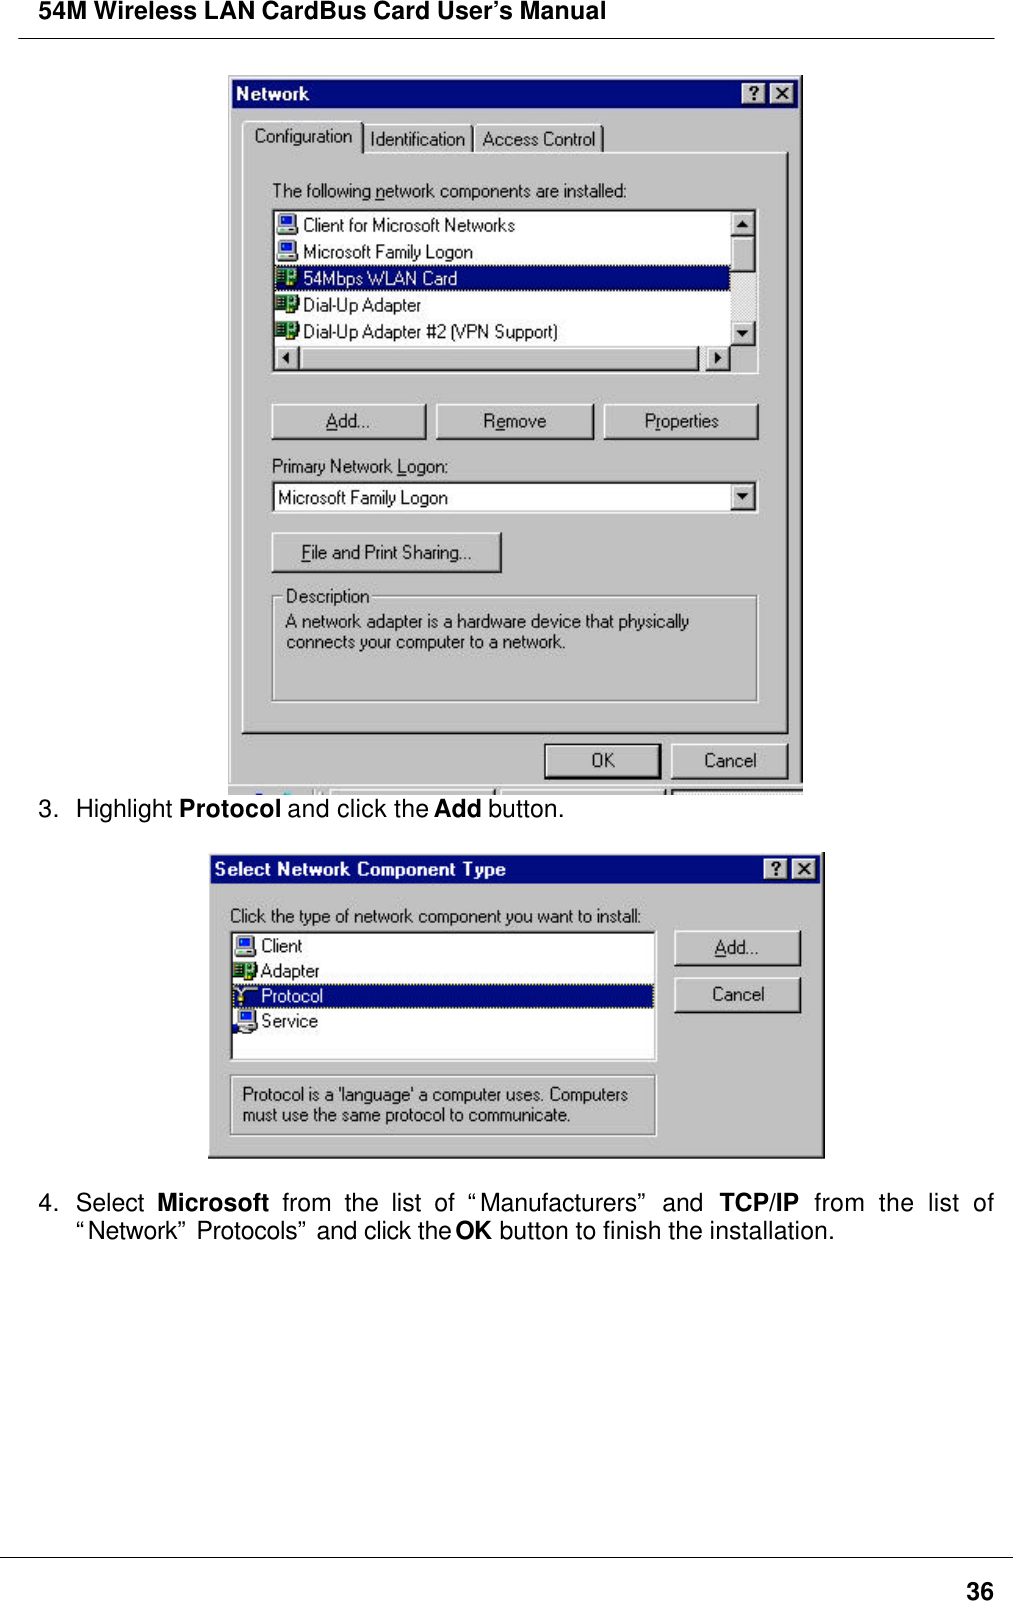 54M Wireless LAN CardBus Card User’s Manual363. Highlight Protocol and click the Add button.4. Select Microsoft from the list of “Manufacturers” and TCP/IP from the list of“Network” Protocols” and click the OK button to finish the installation.